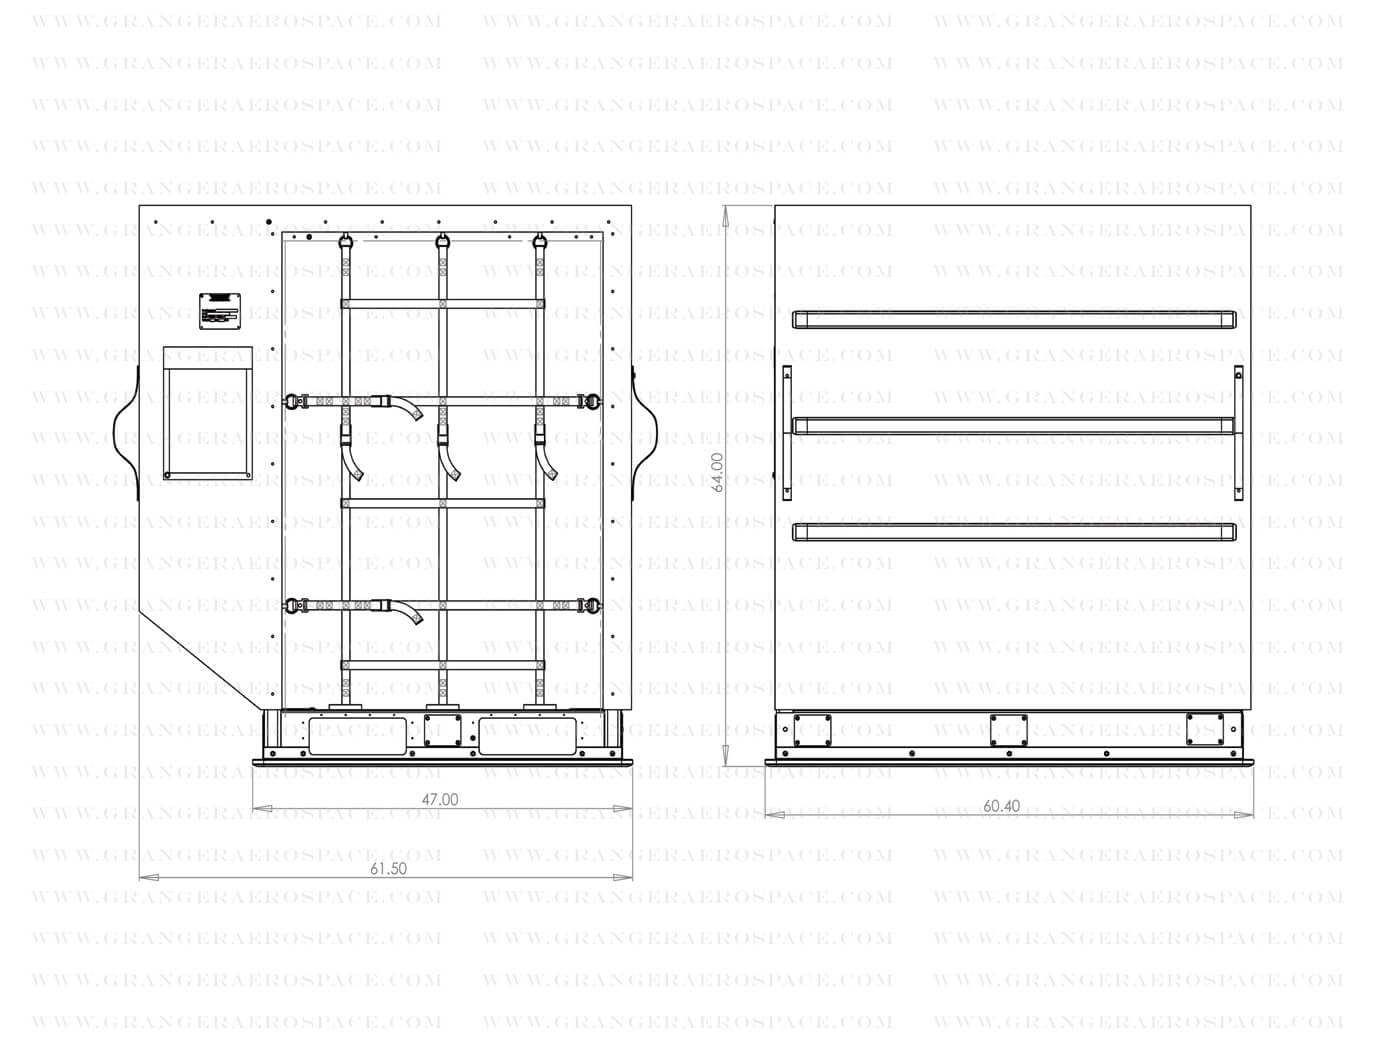 LD 2 Dimensions, LD 2 Air Cargo Container Dimensions, DPN dimensions